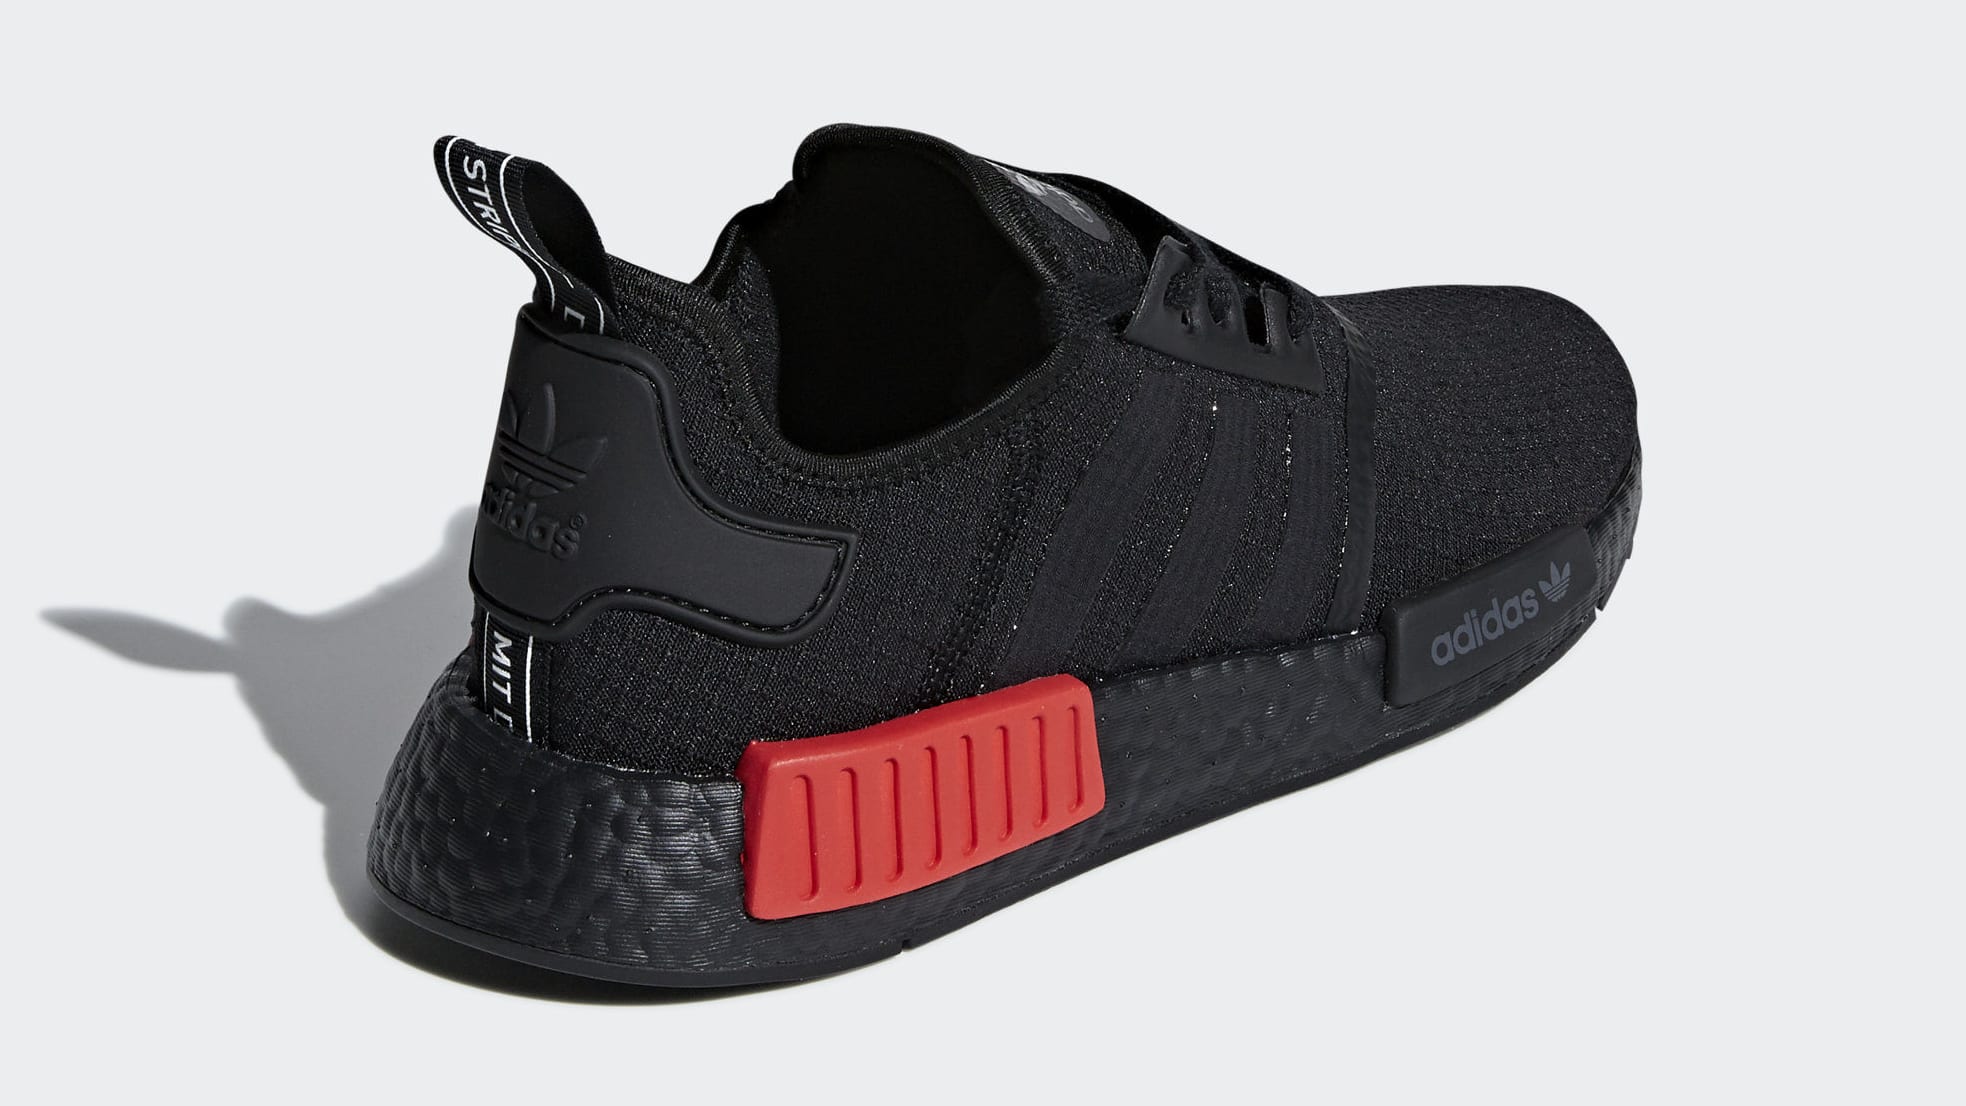 The adidas NMD_R1 Gets the 'Bred' Treatment - Sneaker Freaker